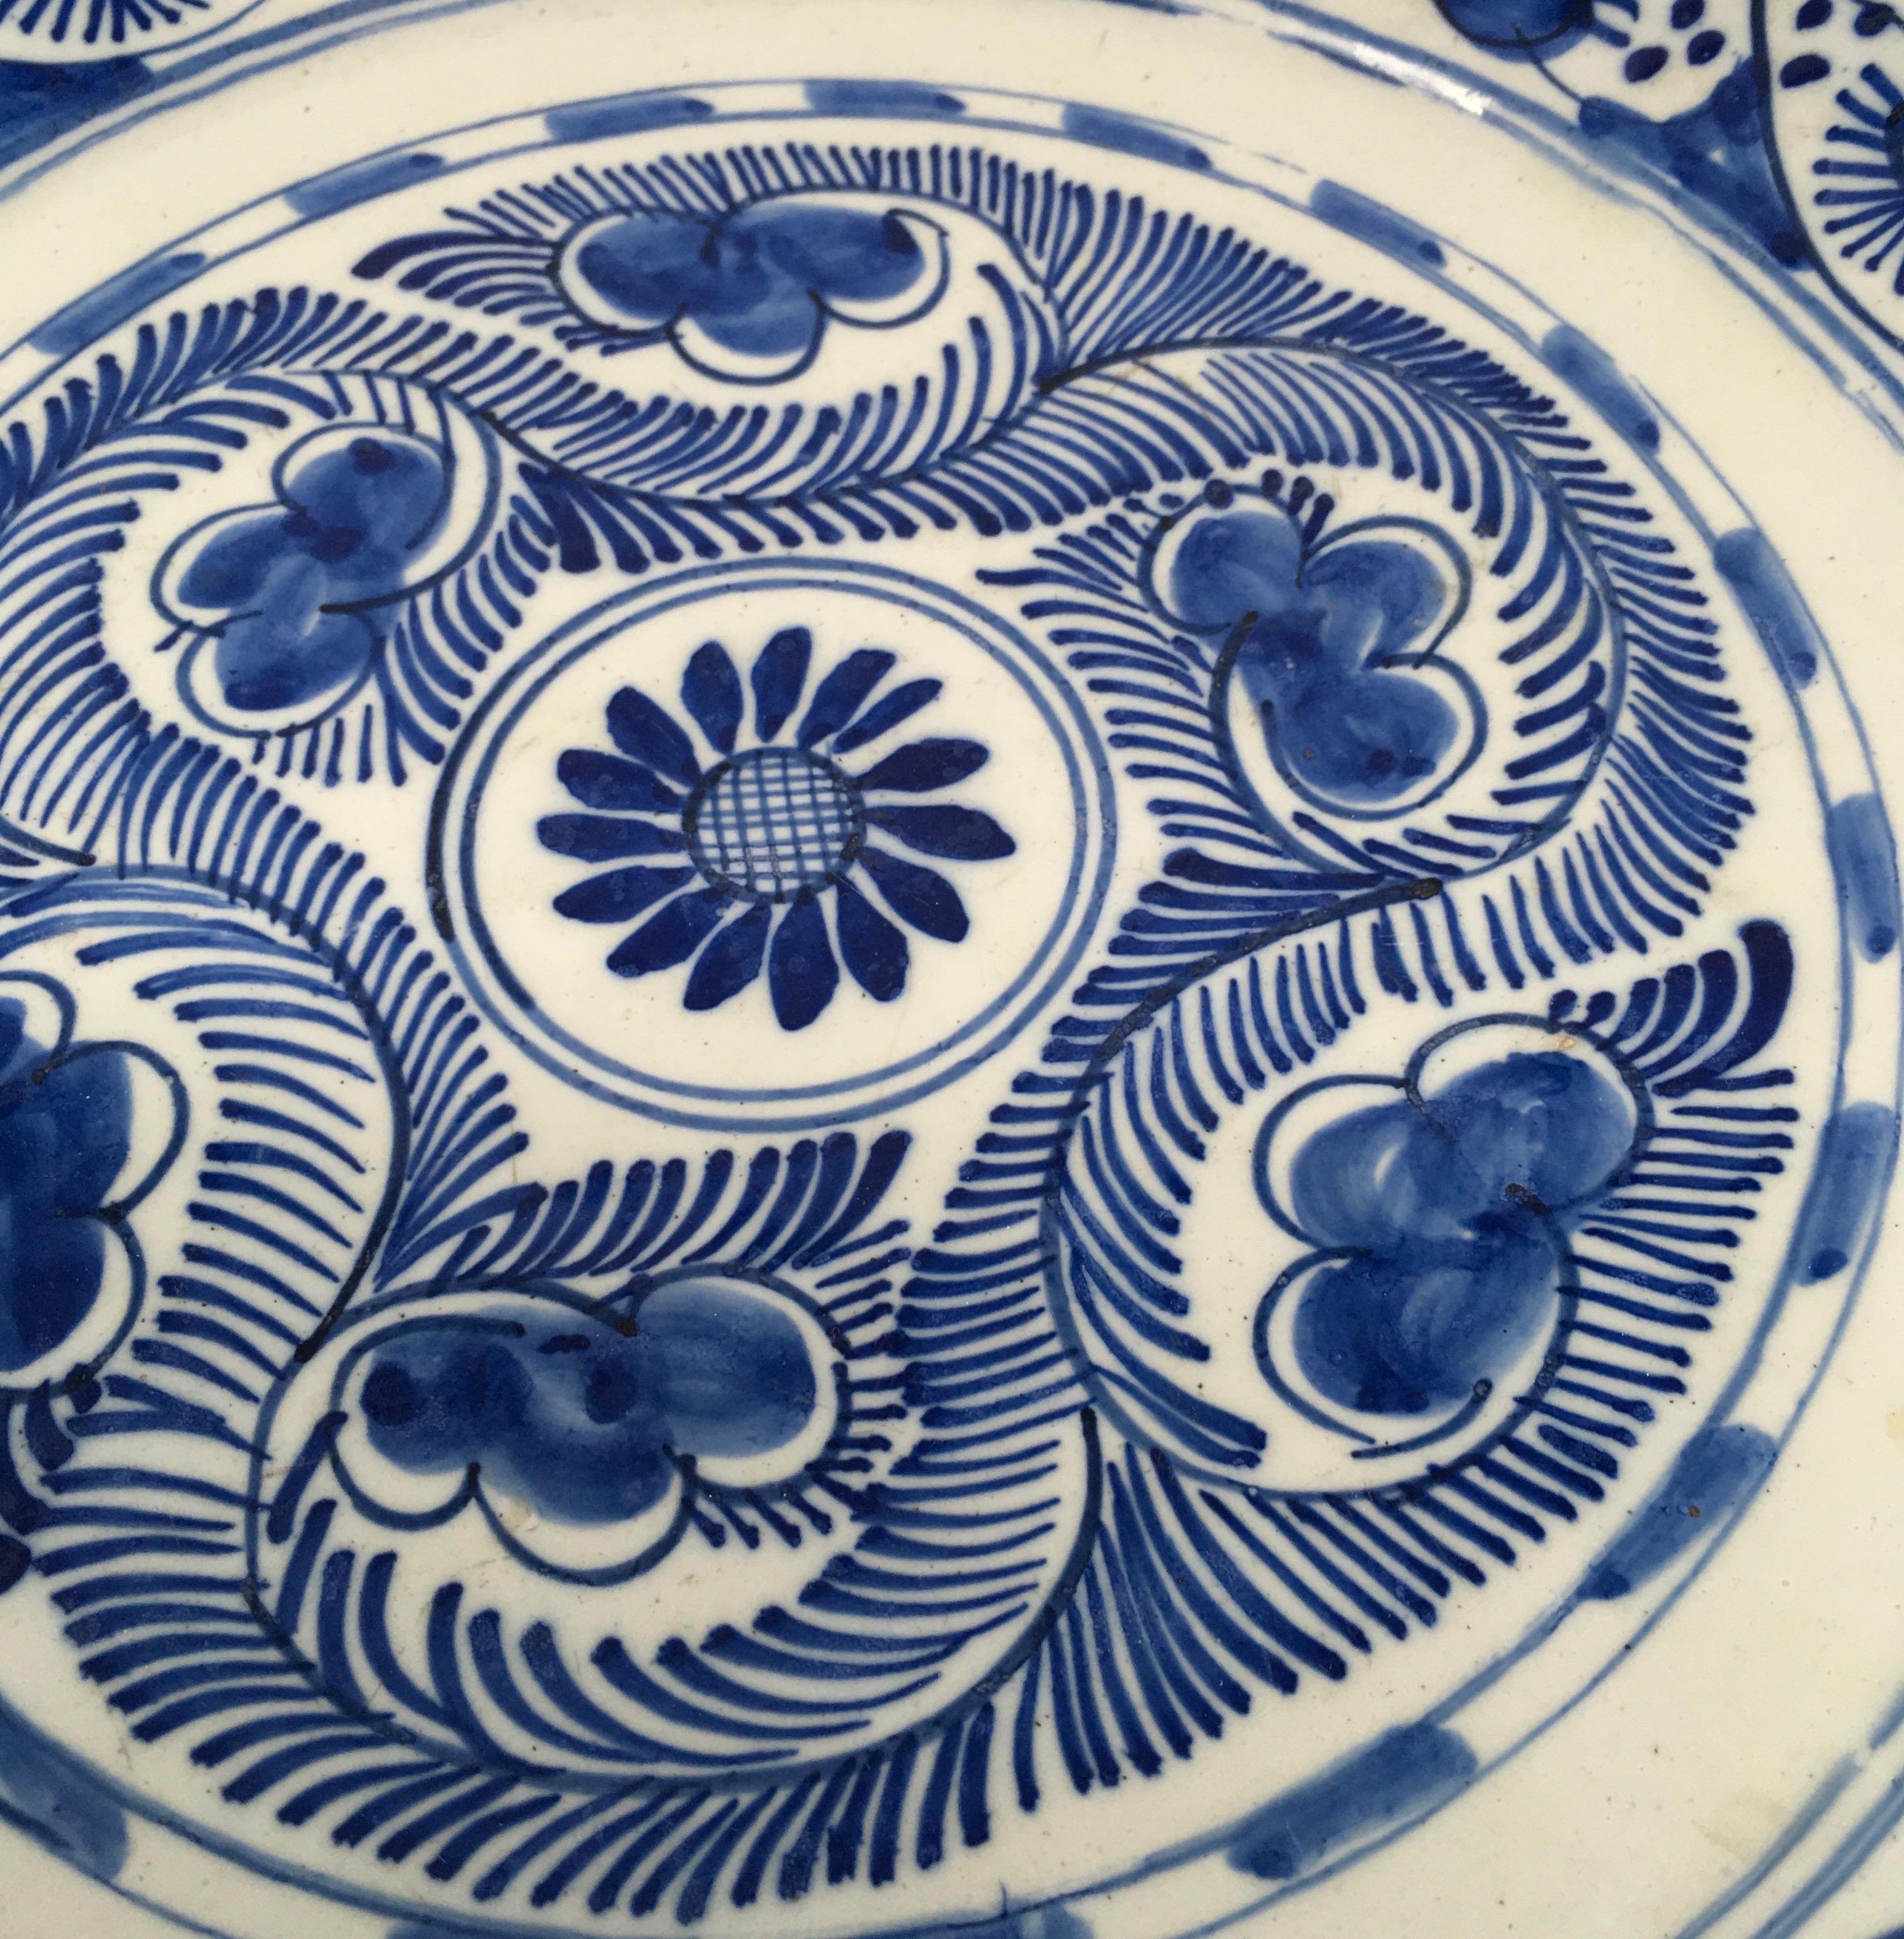 This hand painted Italian Deruta pottery plate has a rich blue patina. The hand painted detail is lovely. It has some nicks, however, we do not believe that these scares detract from the beauty of this plate.